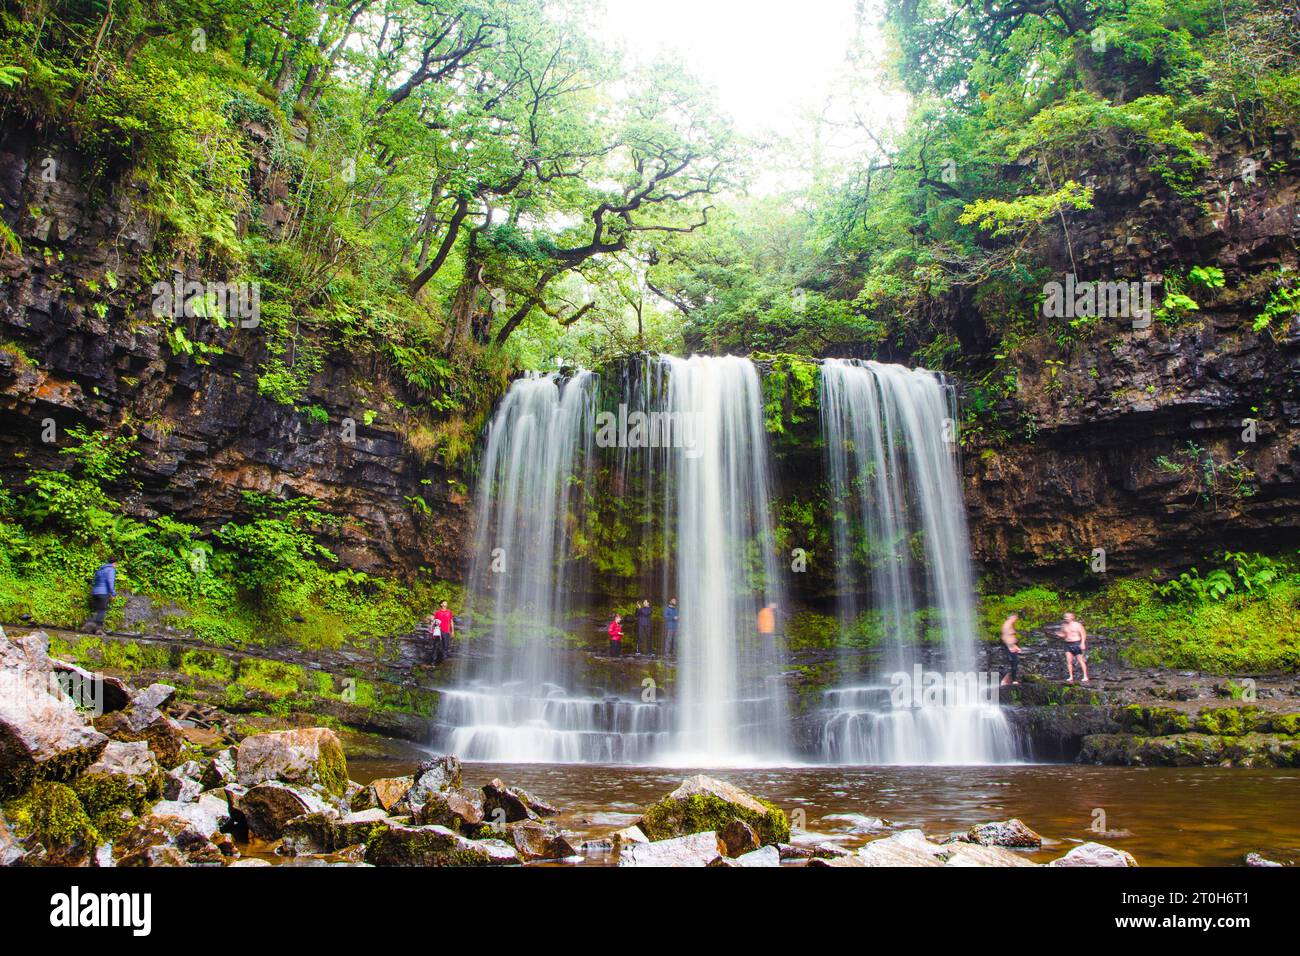 People crossign under Sgwd Yr Eira Waterfall, Four Waterfalls Walk, Brecon Beacons National Park, Wales, UK Stock Photo